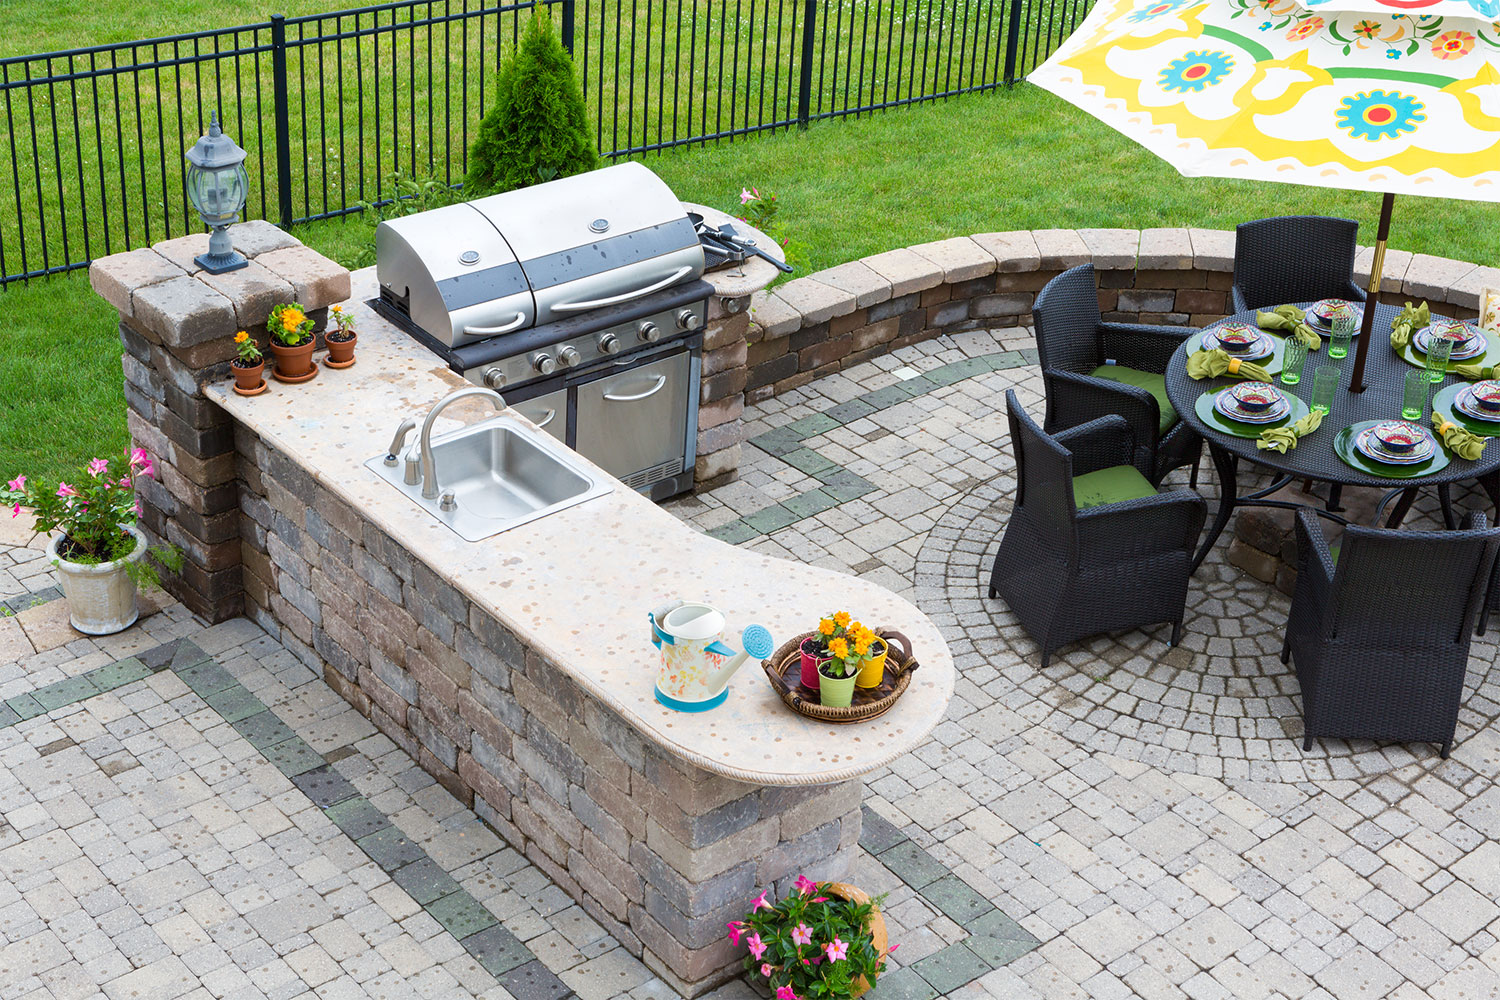 Great outdoor kitchen ideas for small spaces   HappySprout